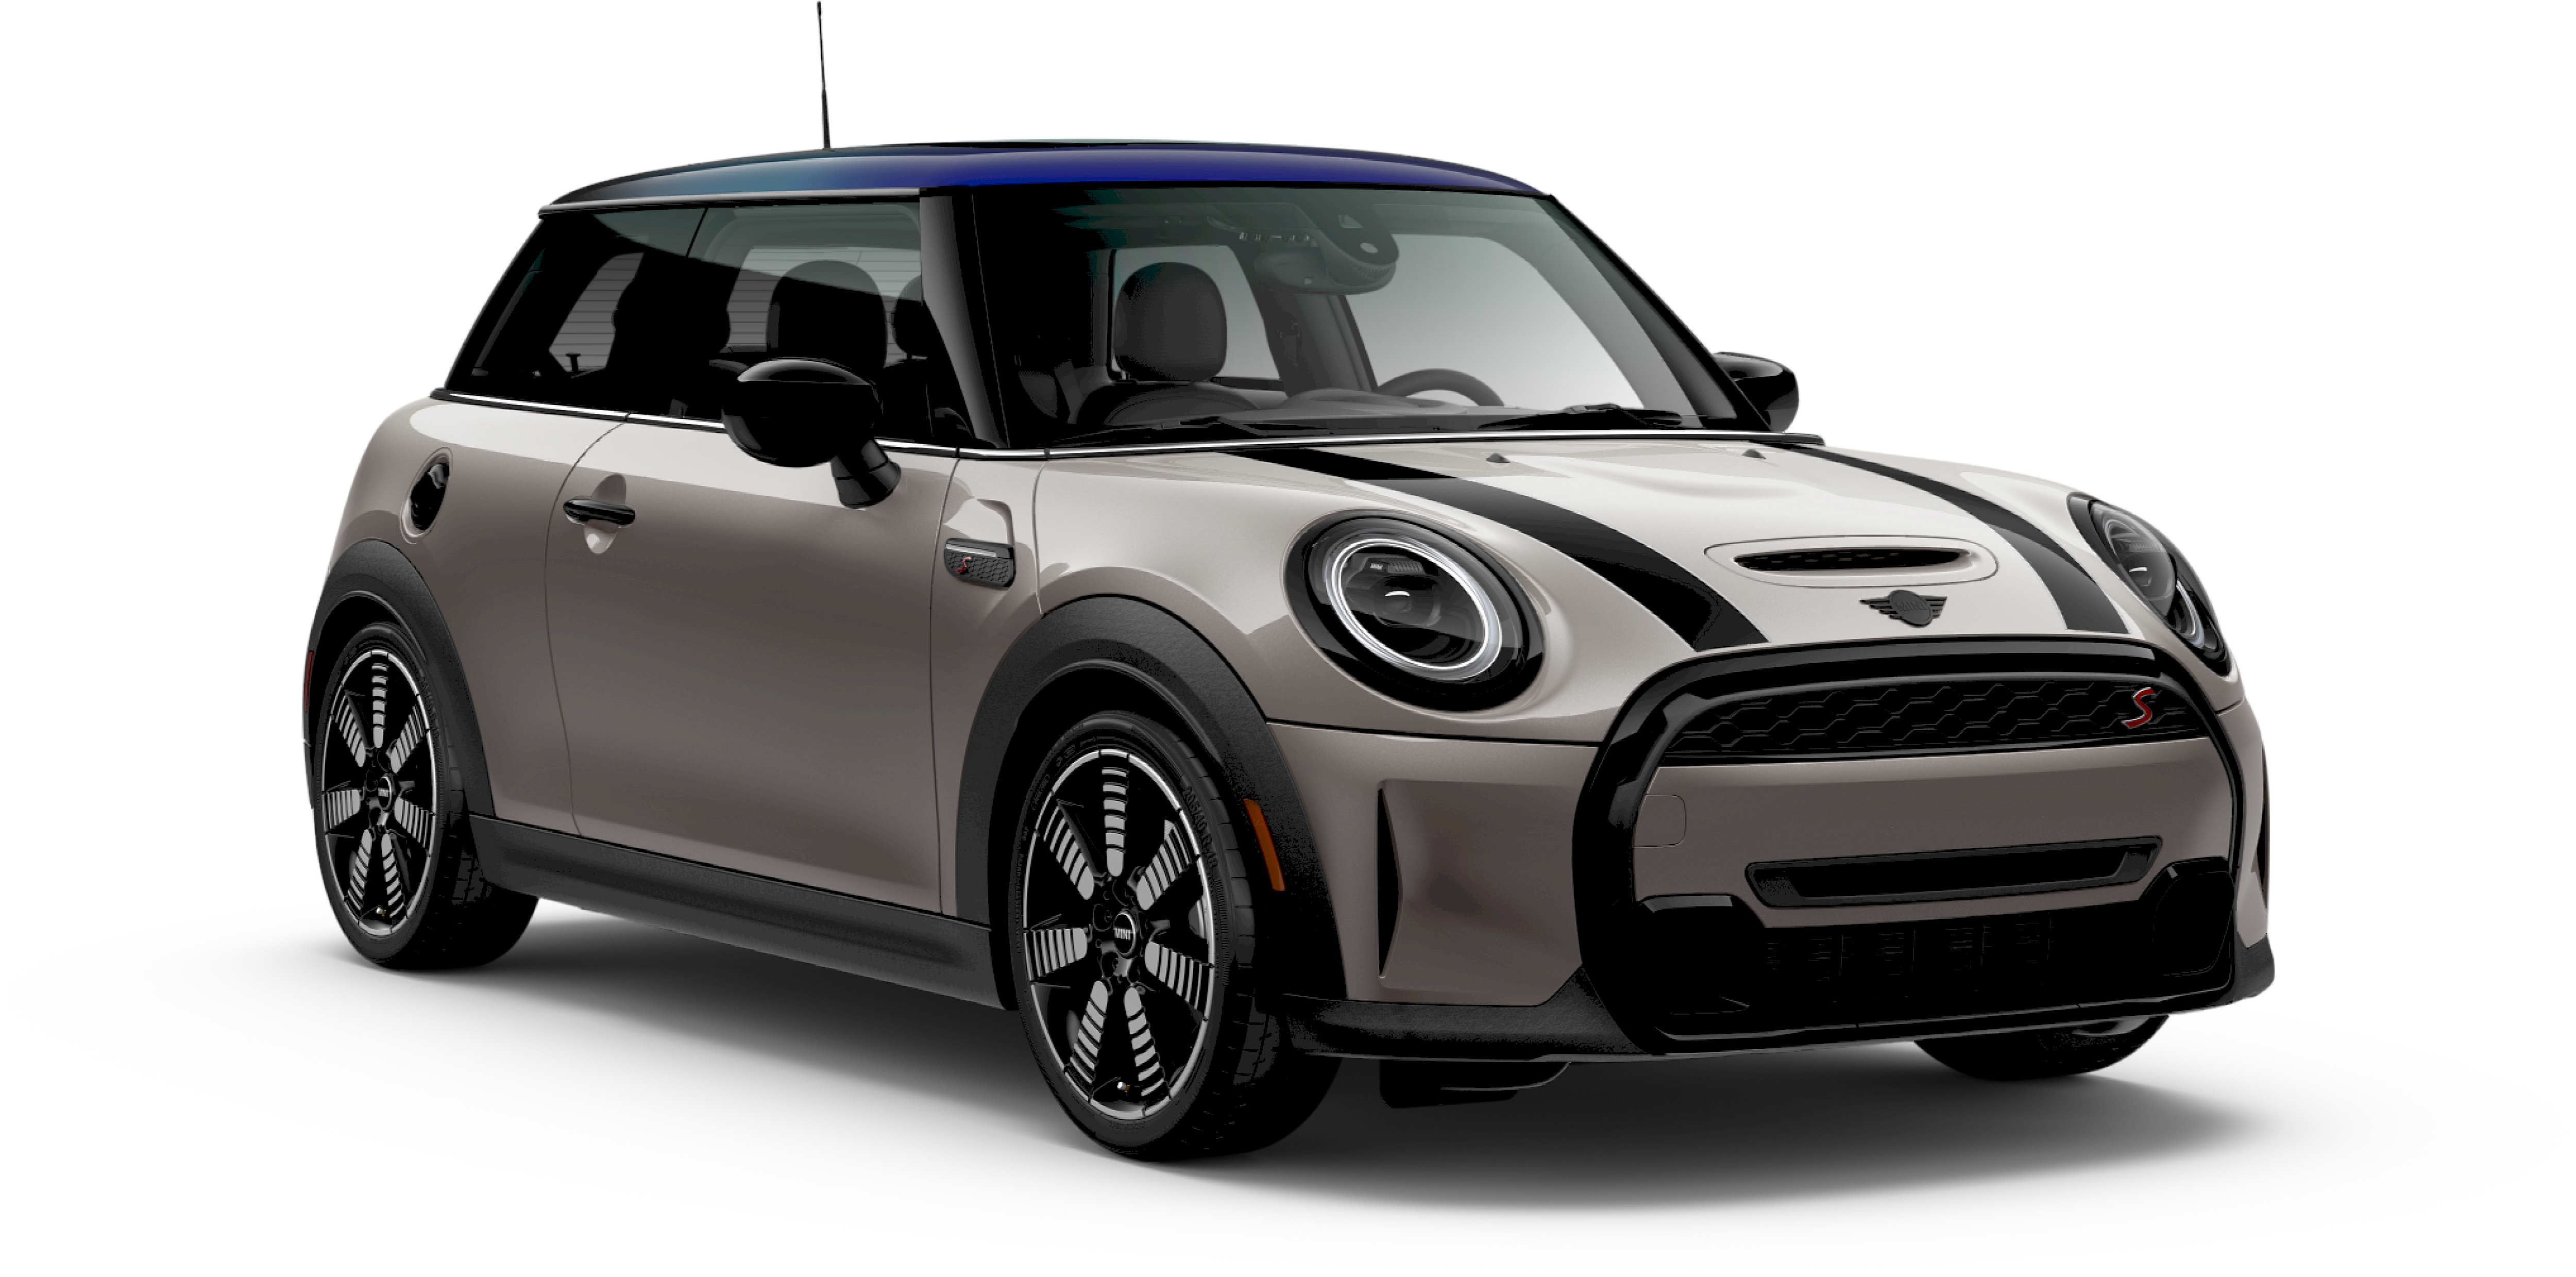 MINI Lease Deals, Finance Offers, Incentives